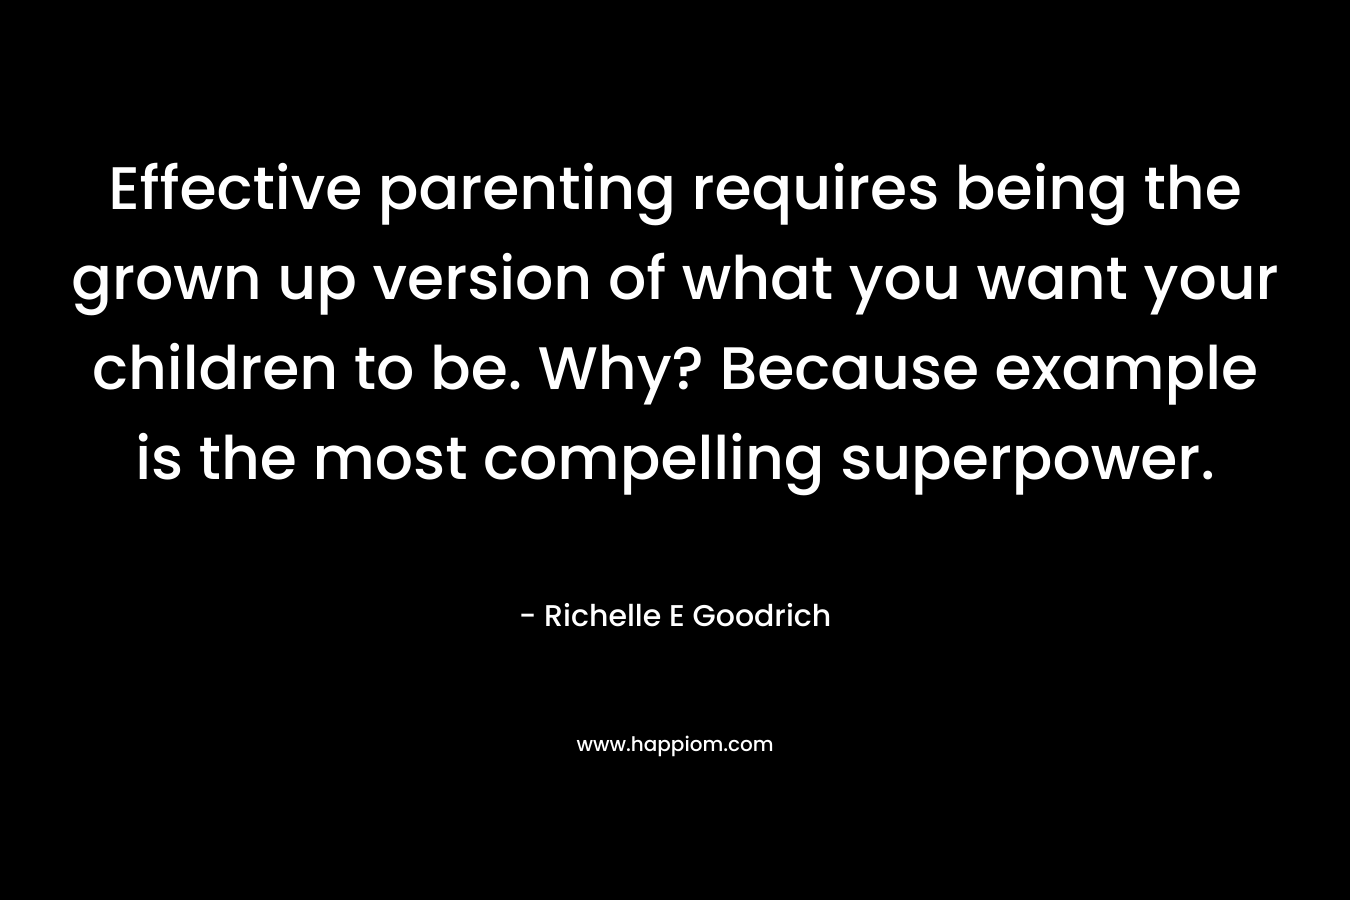 Effective parenting requires being the grown up version of what you want your children to be. Why? Because example is the most compelling superpower. – Richelle E Goodrich